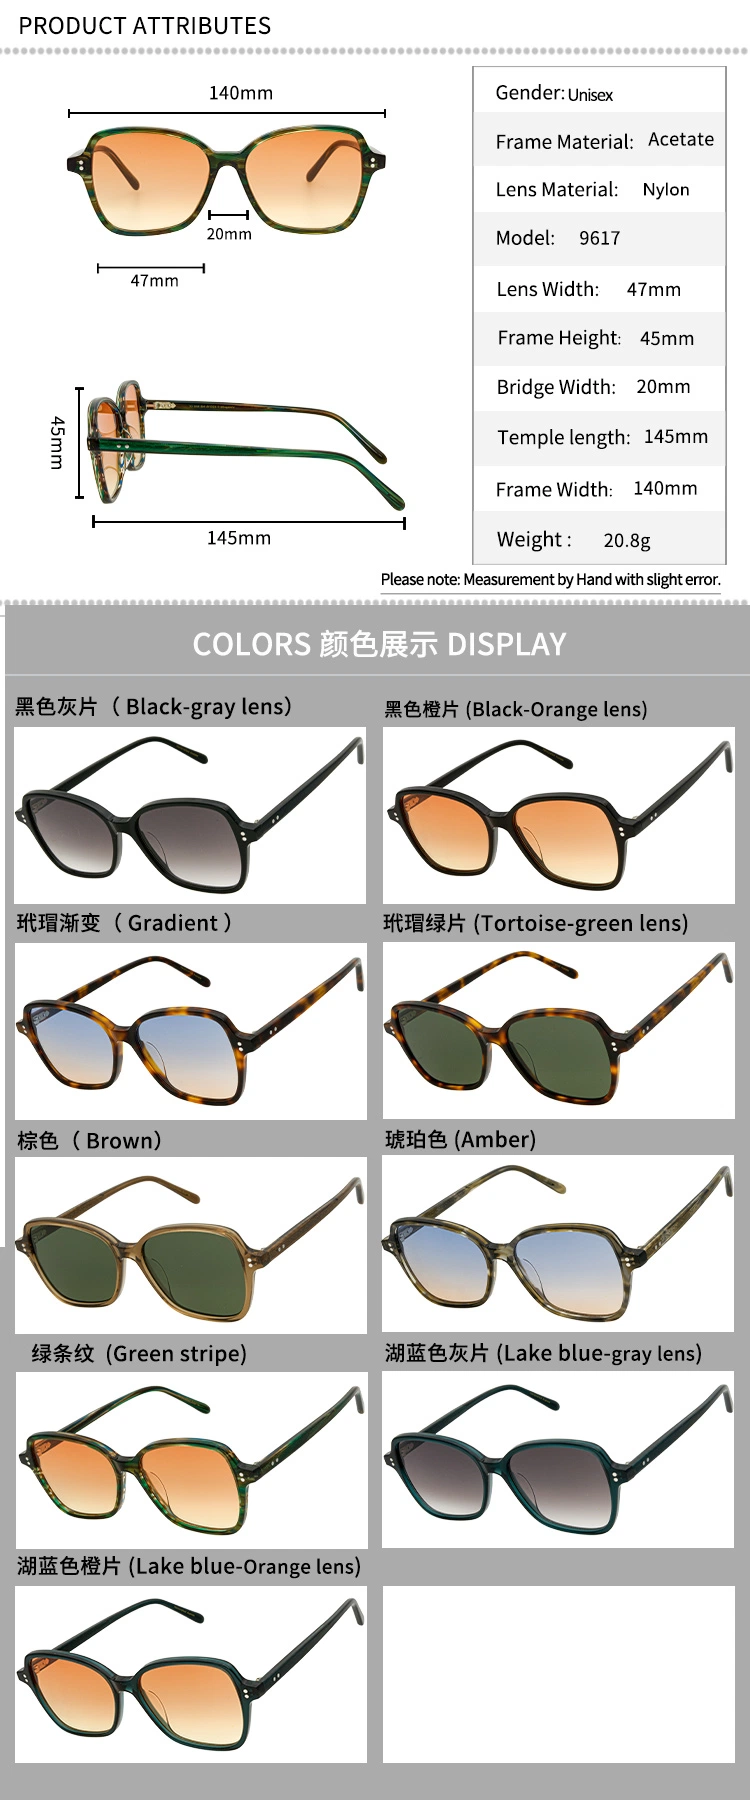 Classic Large Frame Sunglasses, Fashionable Rice Nails, Male and Female Driving, Travel, Sun Shading, Sunglasses, UV Protection, Foreign Trade Factory